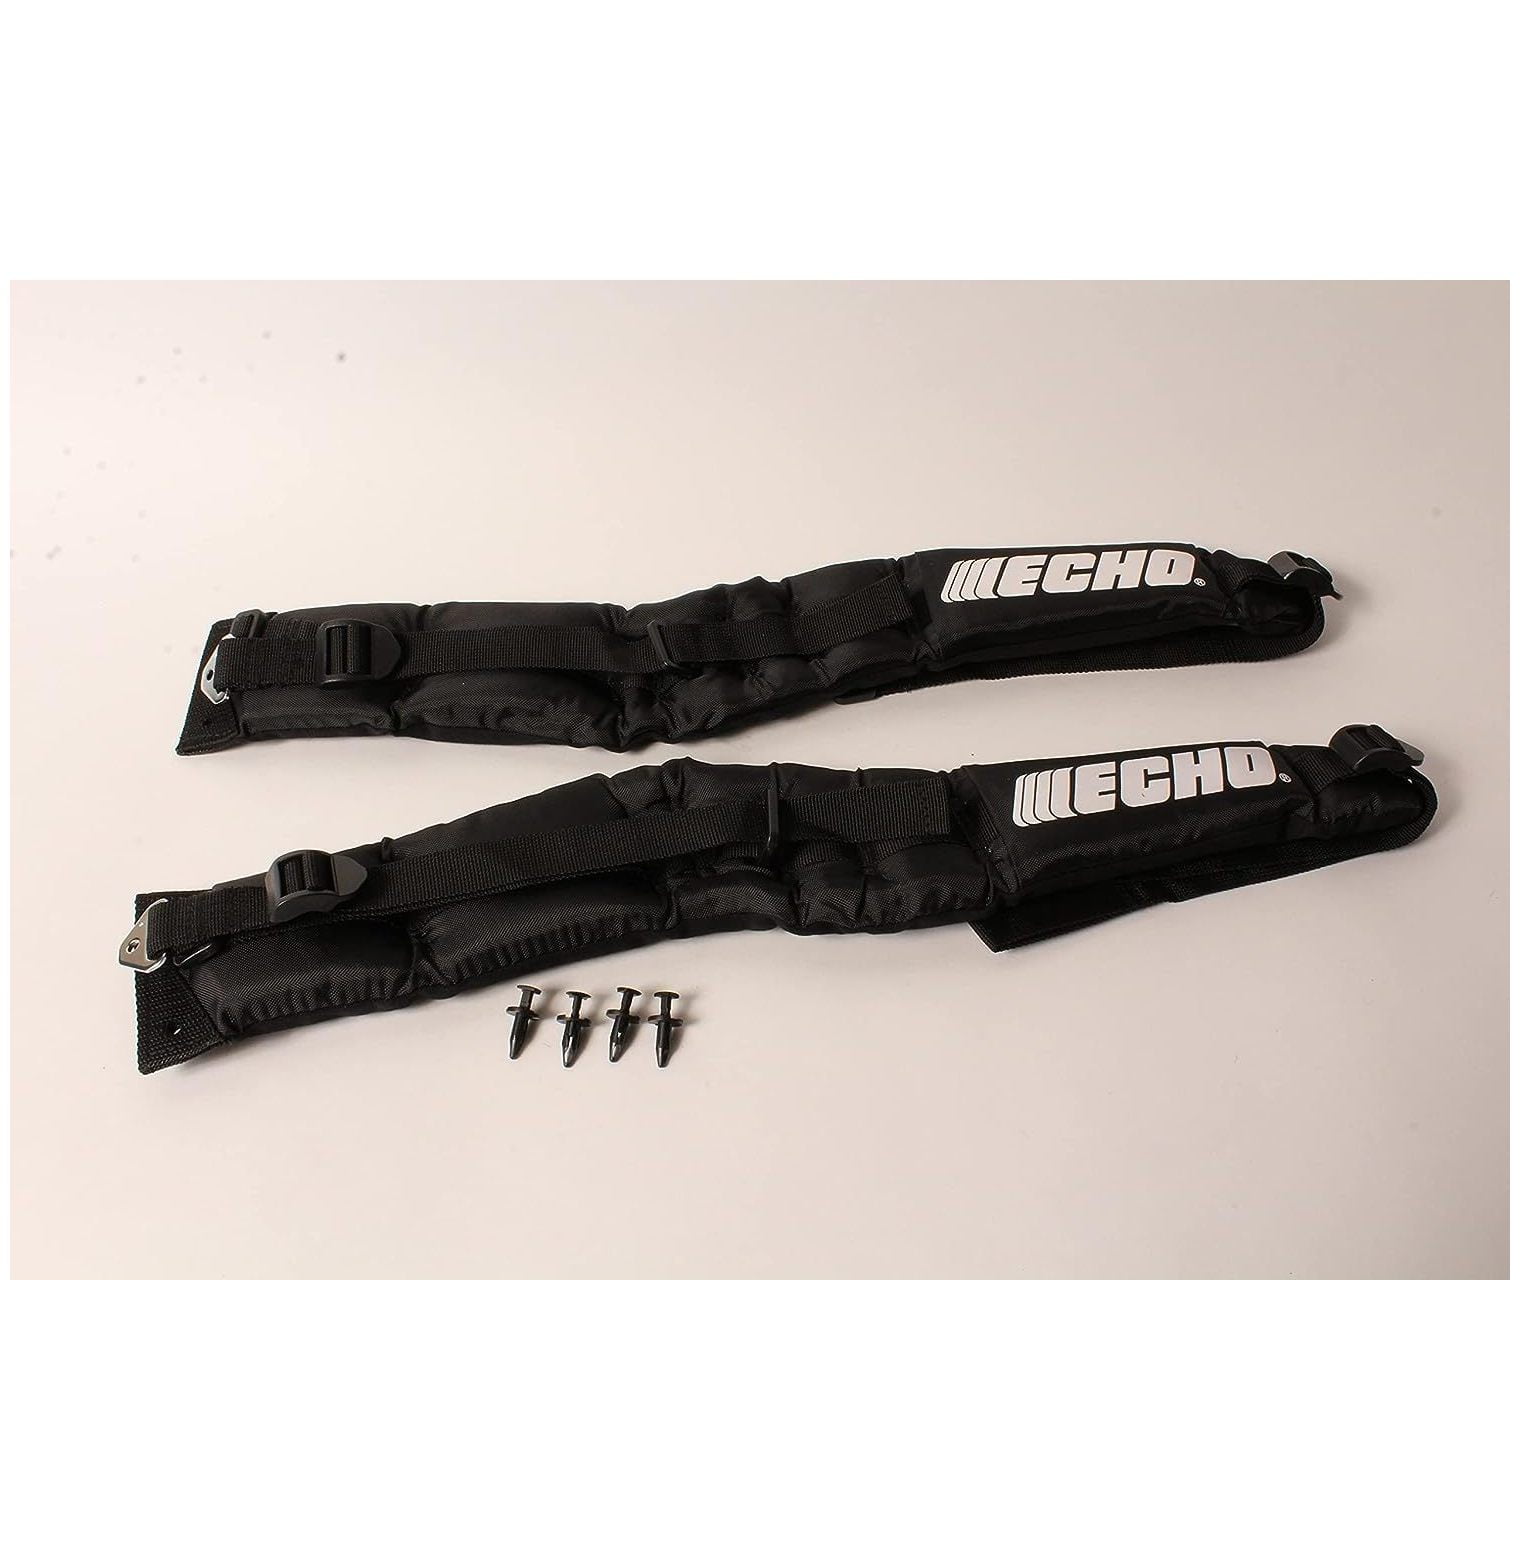 CintBllTer Backpack Blower Harness Strap Kit, Includes 2 Straps Left  Right/PB-760LNH PB-770H PB-770T / P021046661 P021046660 